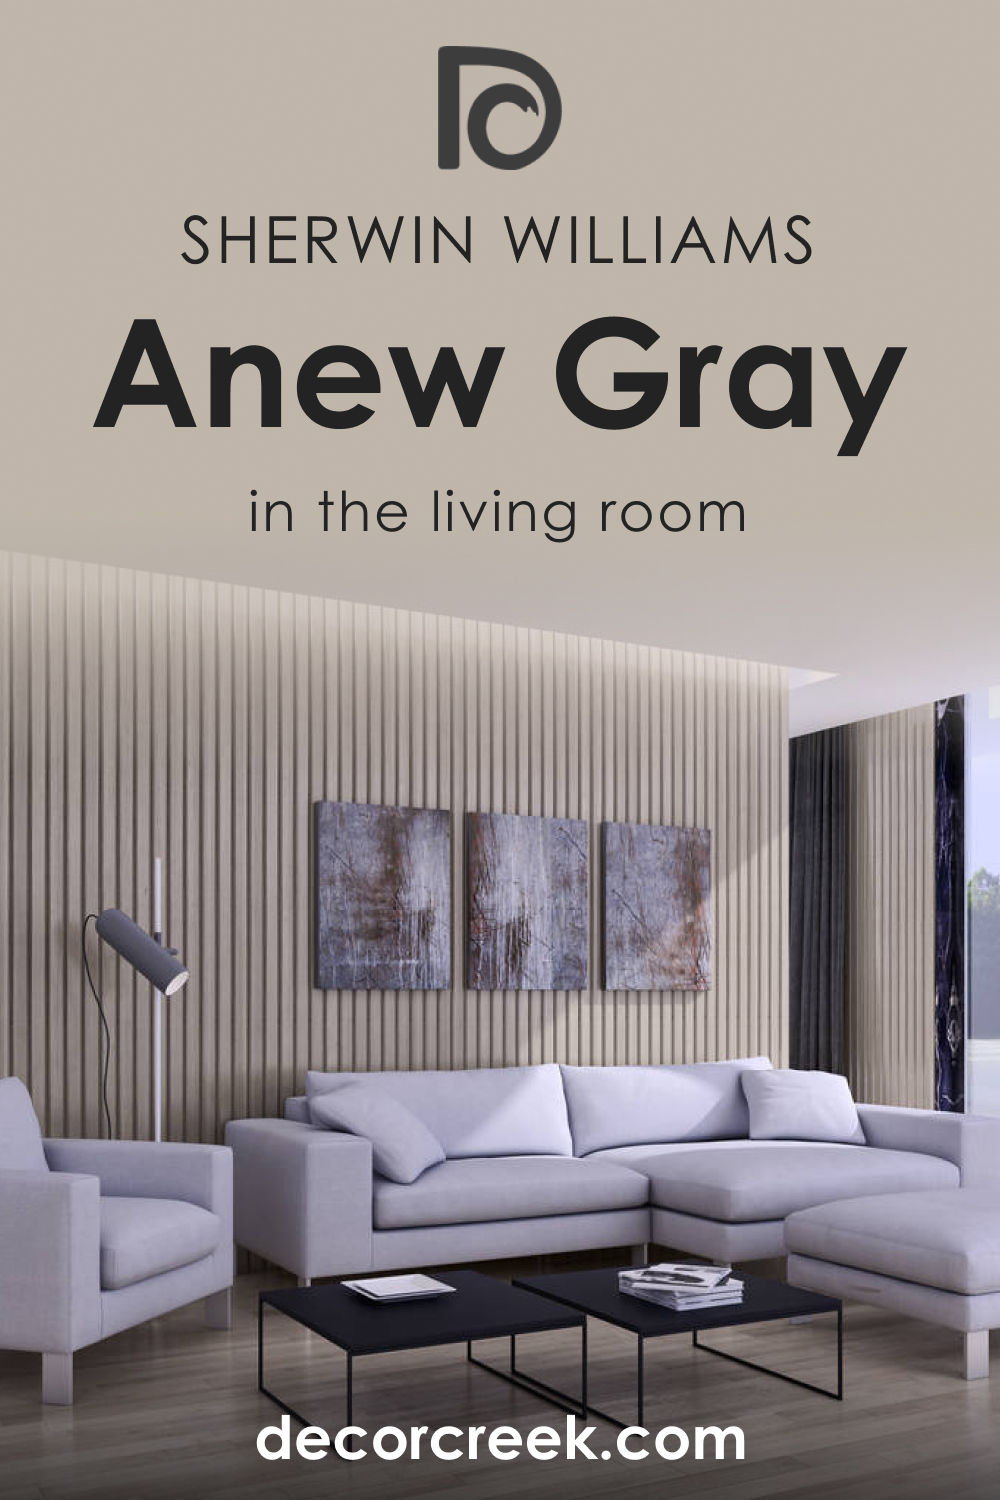 How to Use SW 7030 Anew Gray in the Living Room?